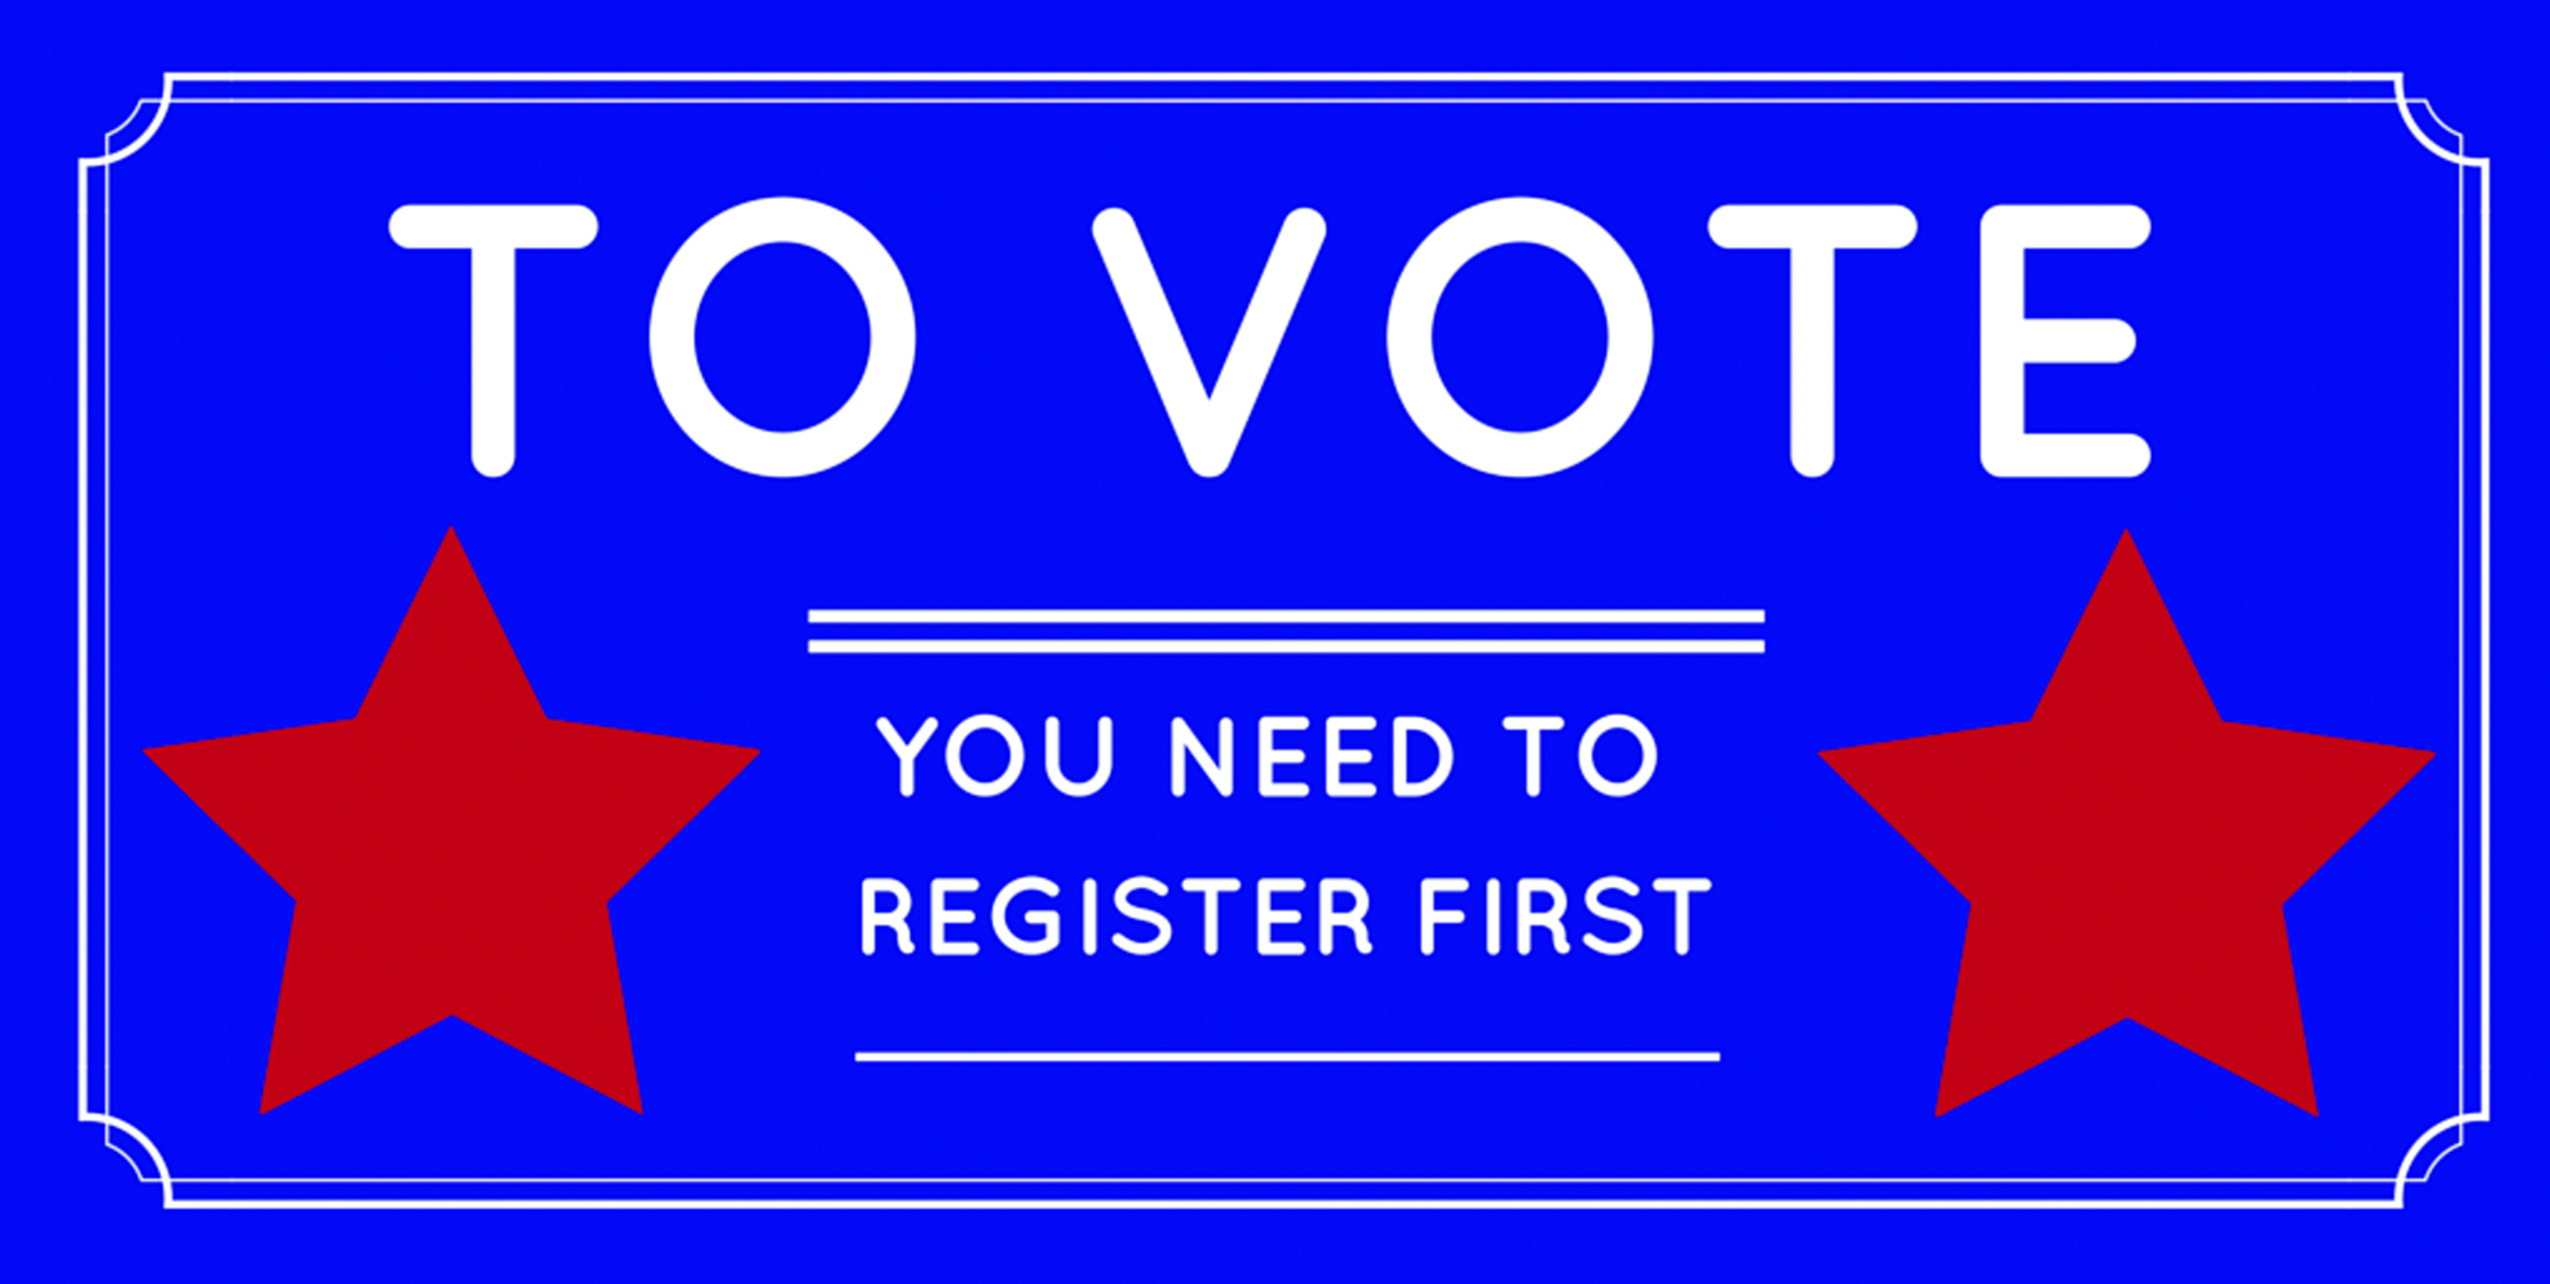 Blue Image with red stars and test reading to vote you need to register first